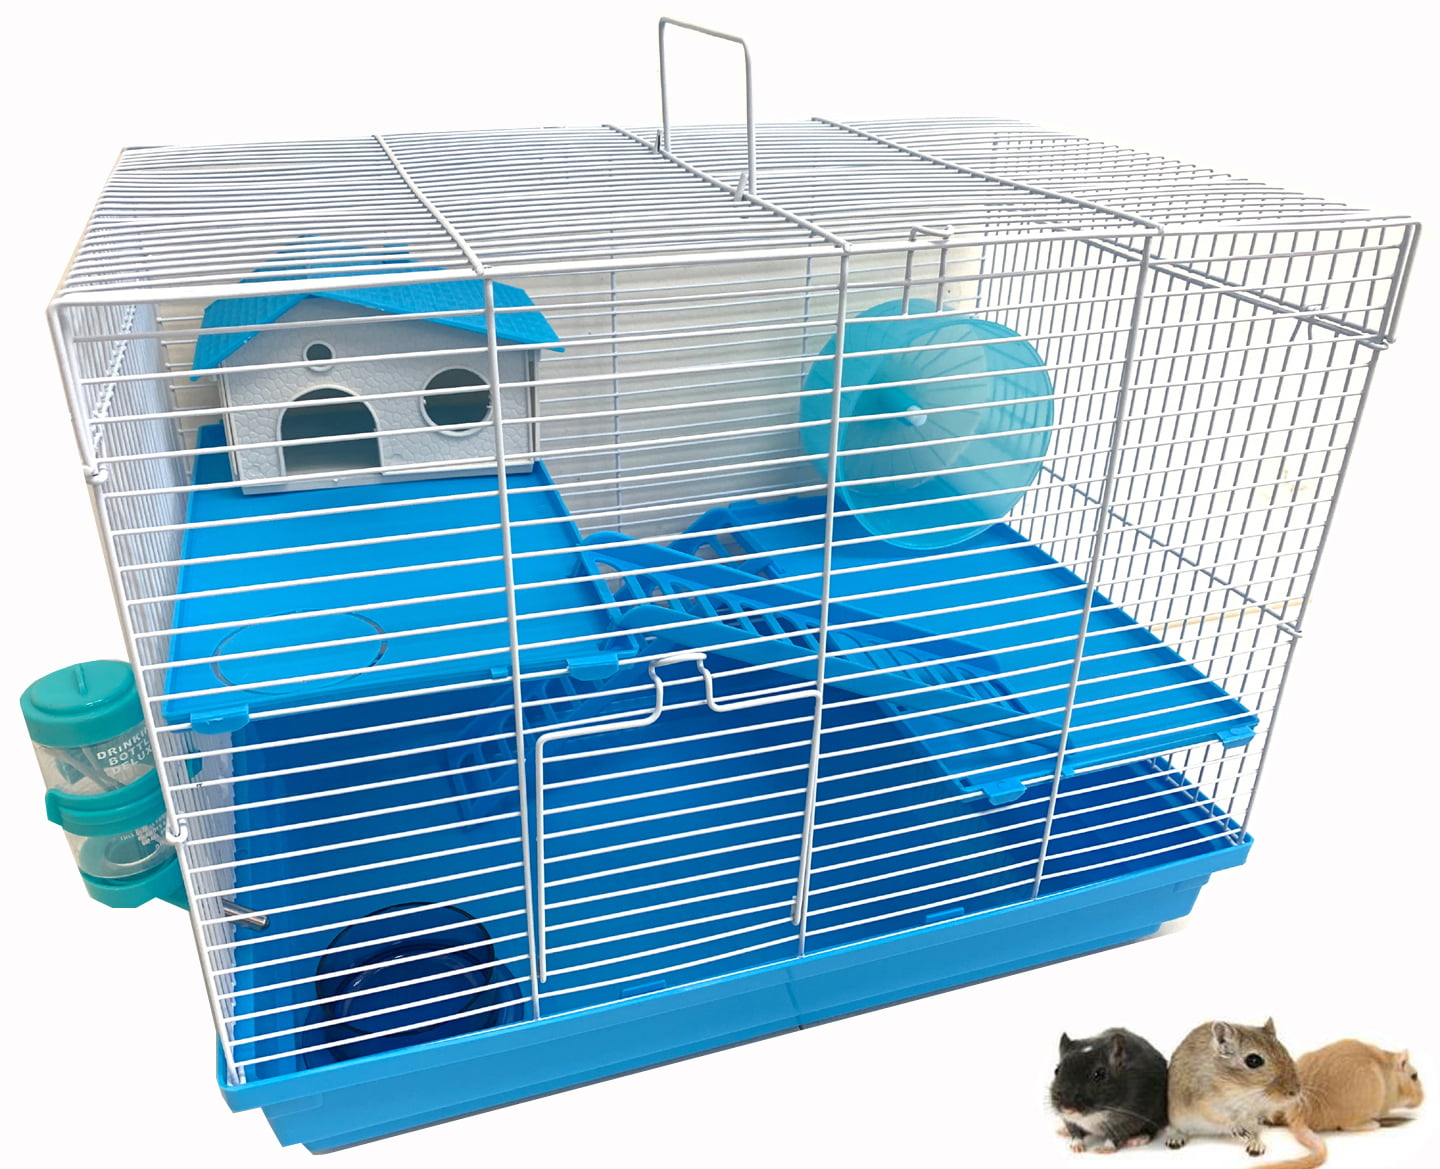 2. Keep your Hamster Healthy and Happy with these Essential Cage Accessories.